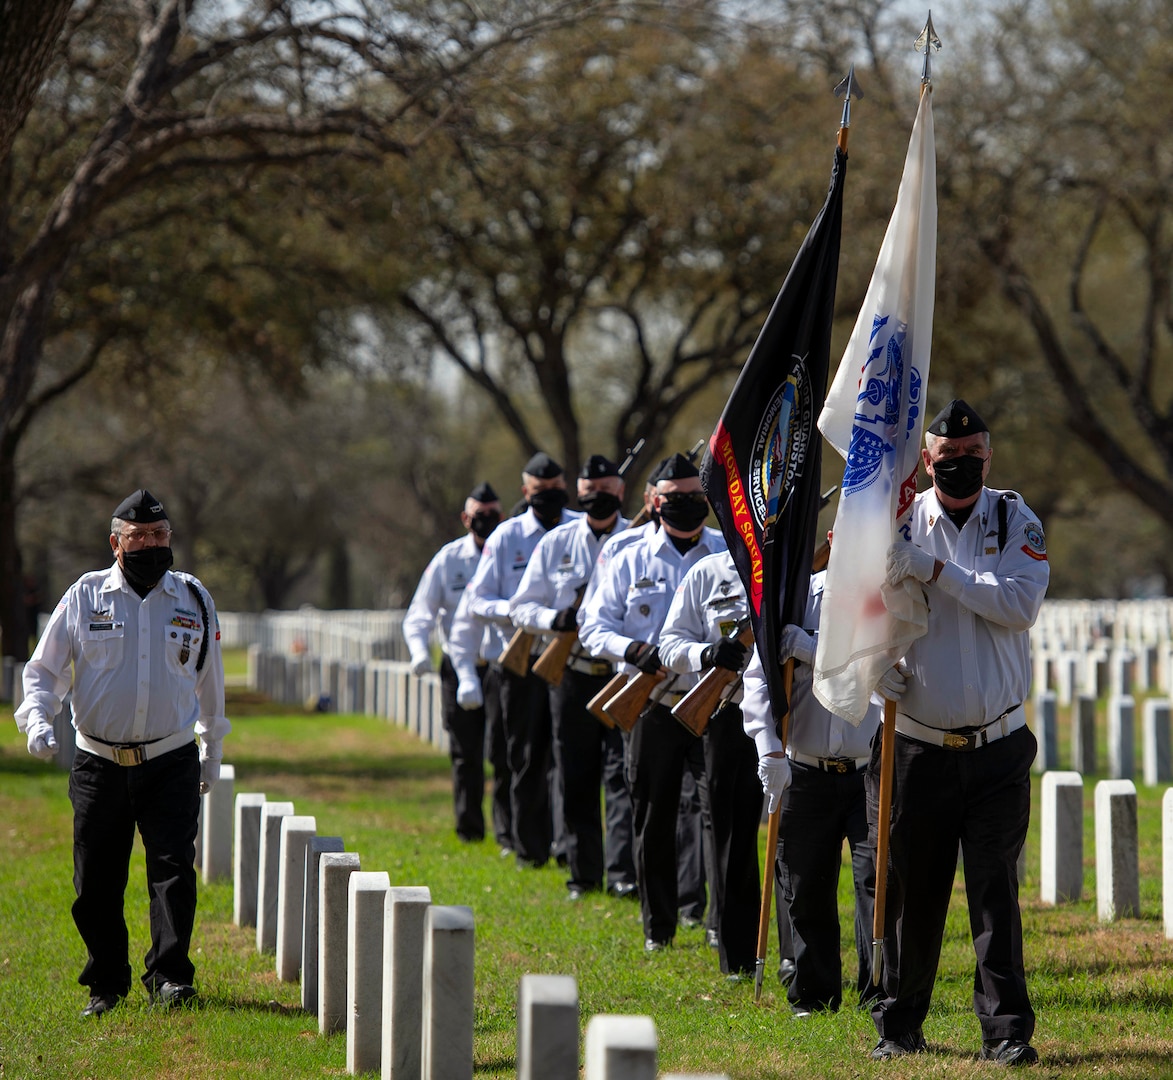 Members of the Fort Sam Houston Memorial Services Detachment proceed to a funeral service at the Fort Sam Houston National Cemetery in San Antonio March 15. This was the detachment’s 40,000th service at the cemetery. A small ceremony was held after the funeral to commemorate the detachment’s milestone.